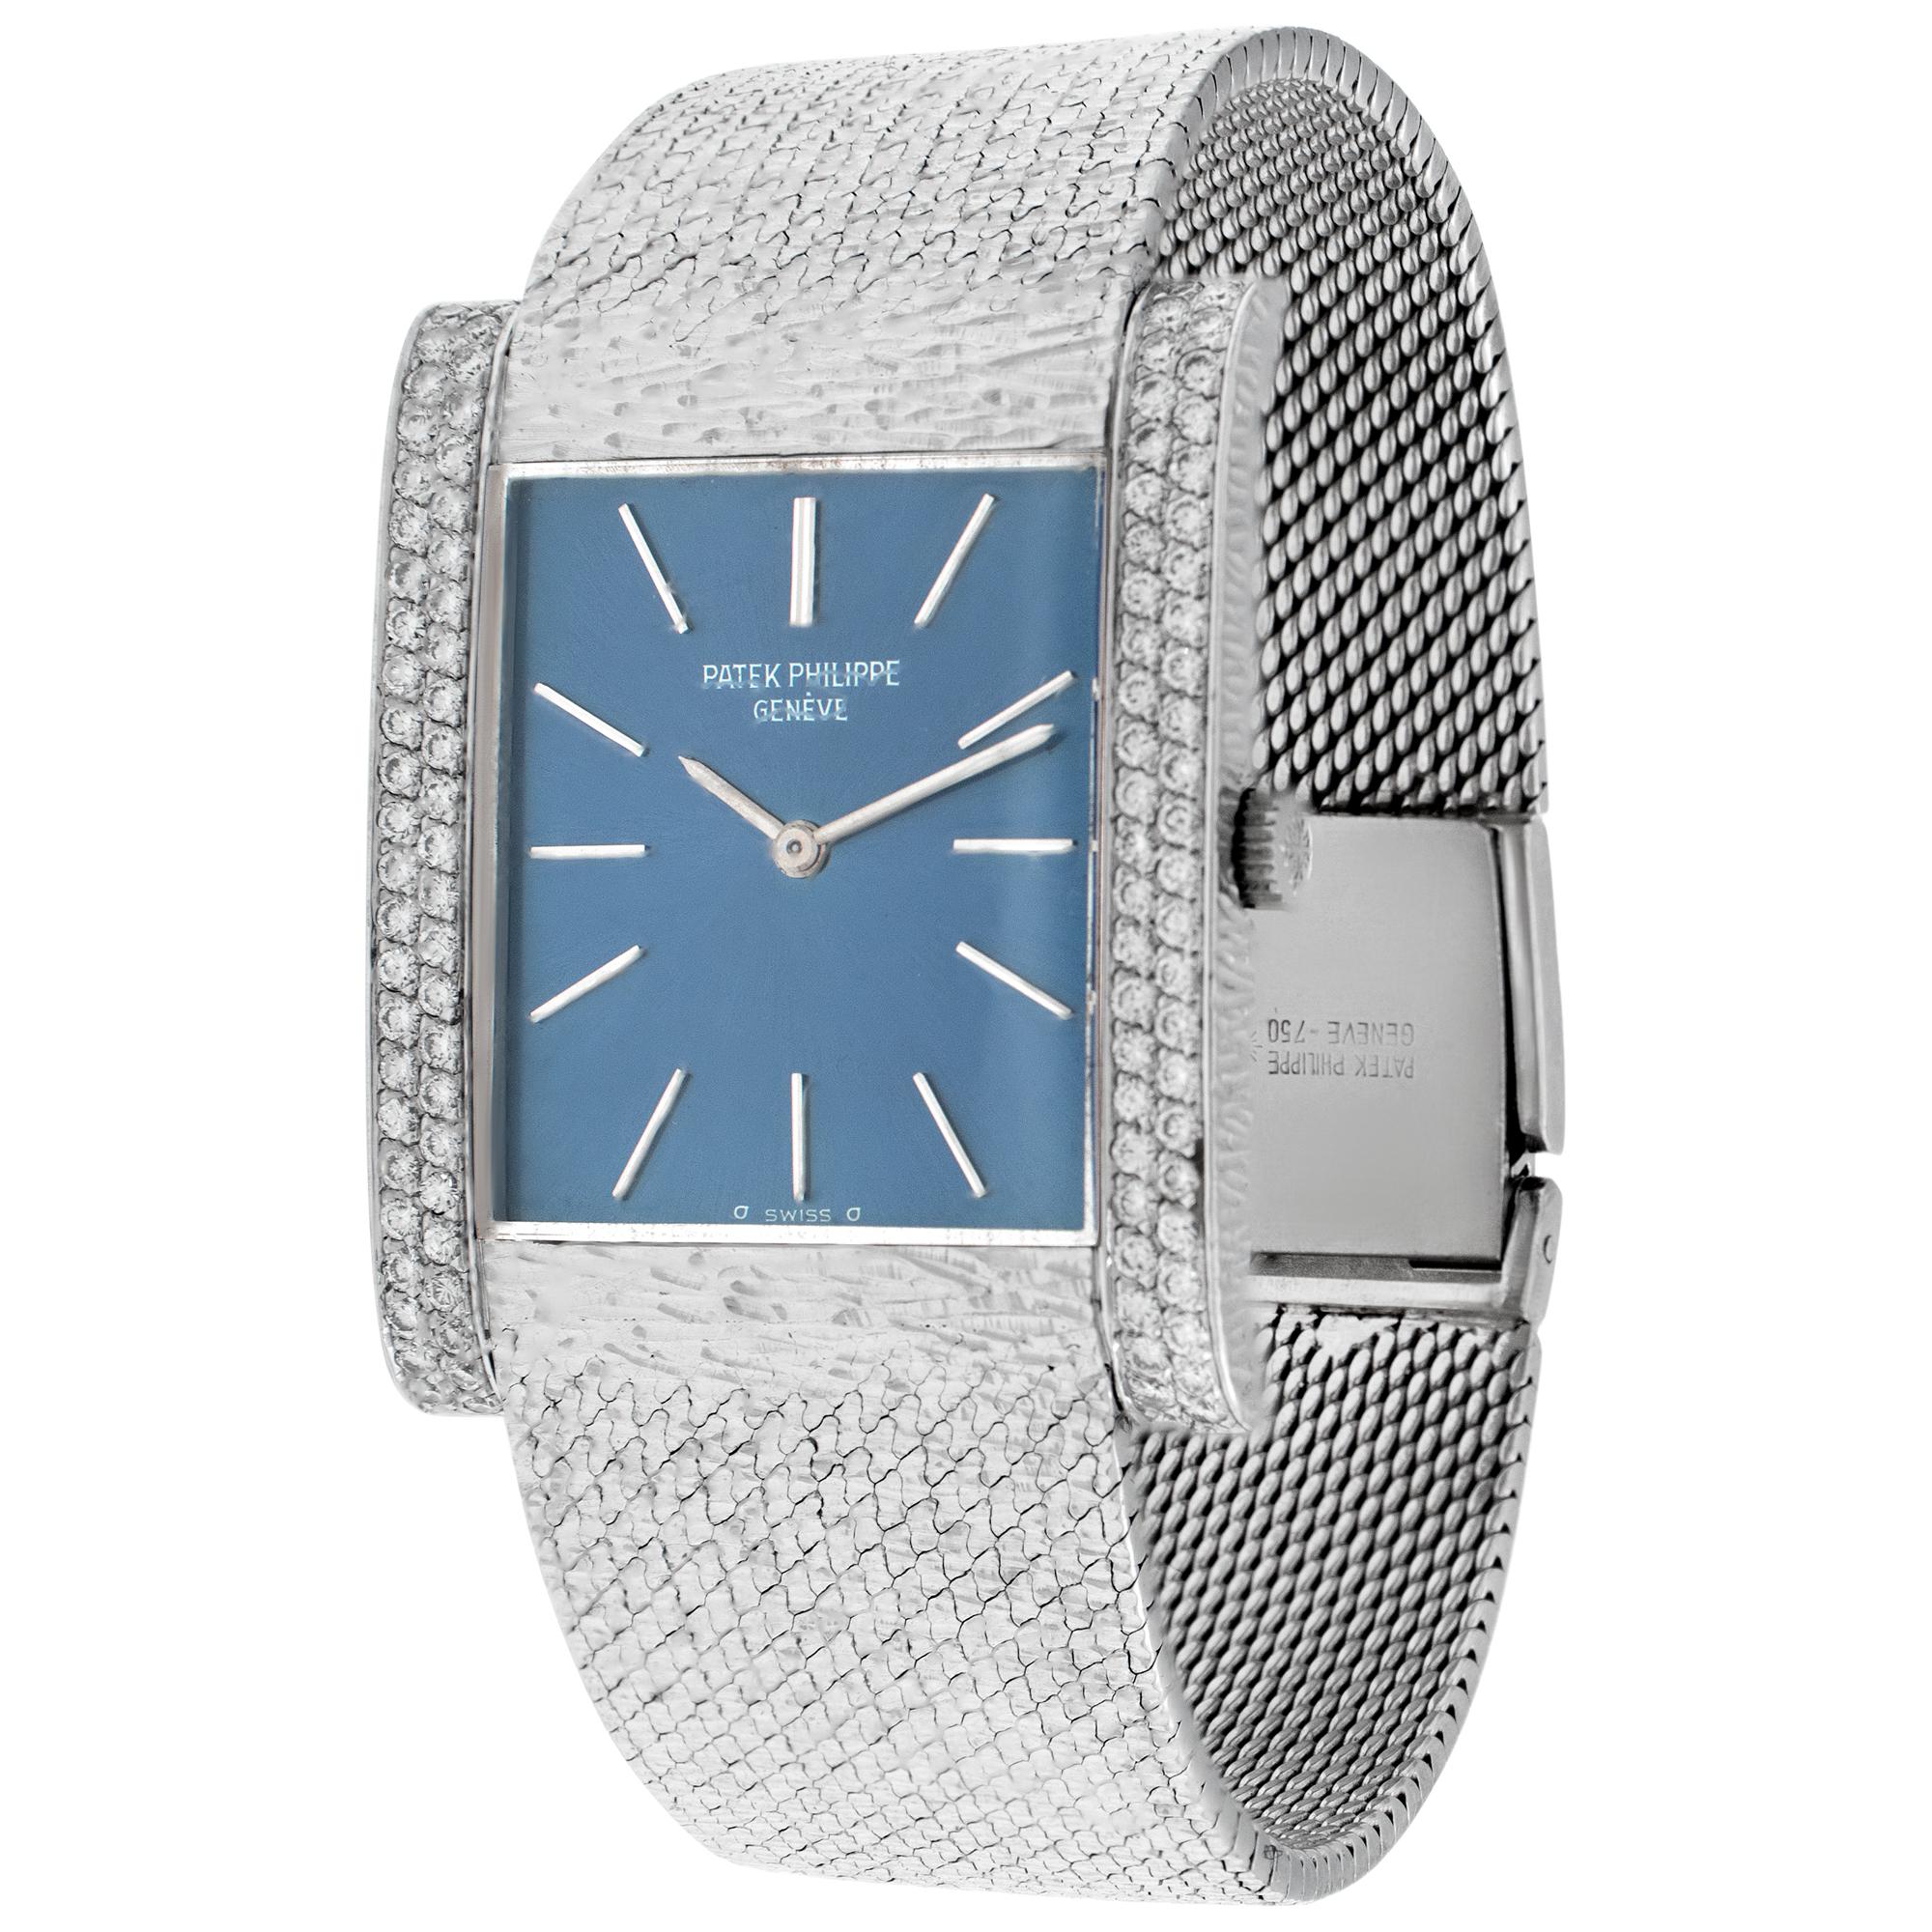 Patek Philippe Gondolo in 18k white gold with double row pave diamond bezel and navy sigma stick dial. Manual. 33 mm length by 26 mm width case size. Will fit a 6.5 to 6.75 inch wrist. Ref 3553-1. Fine Pre-owned Patek Philippe Watch. Certified